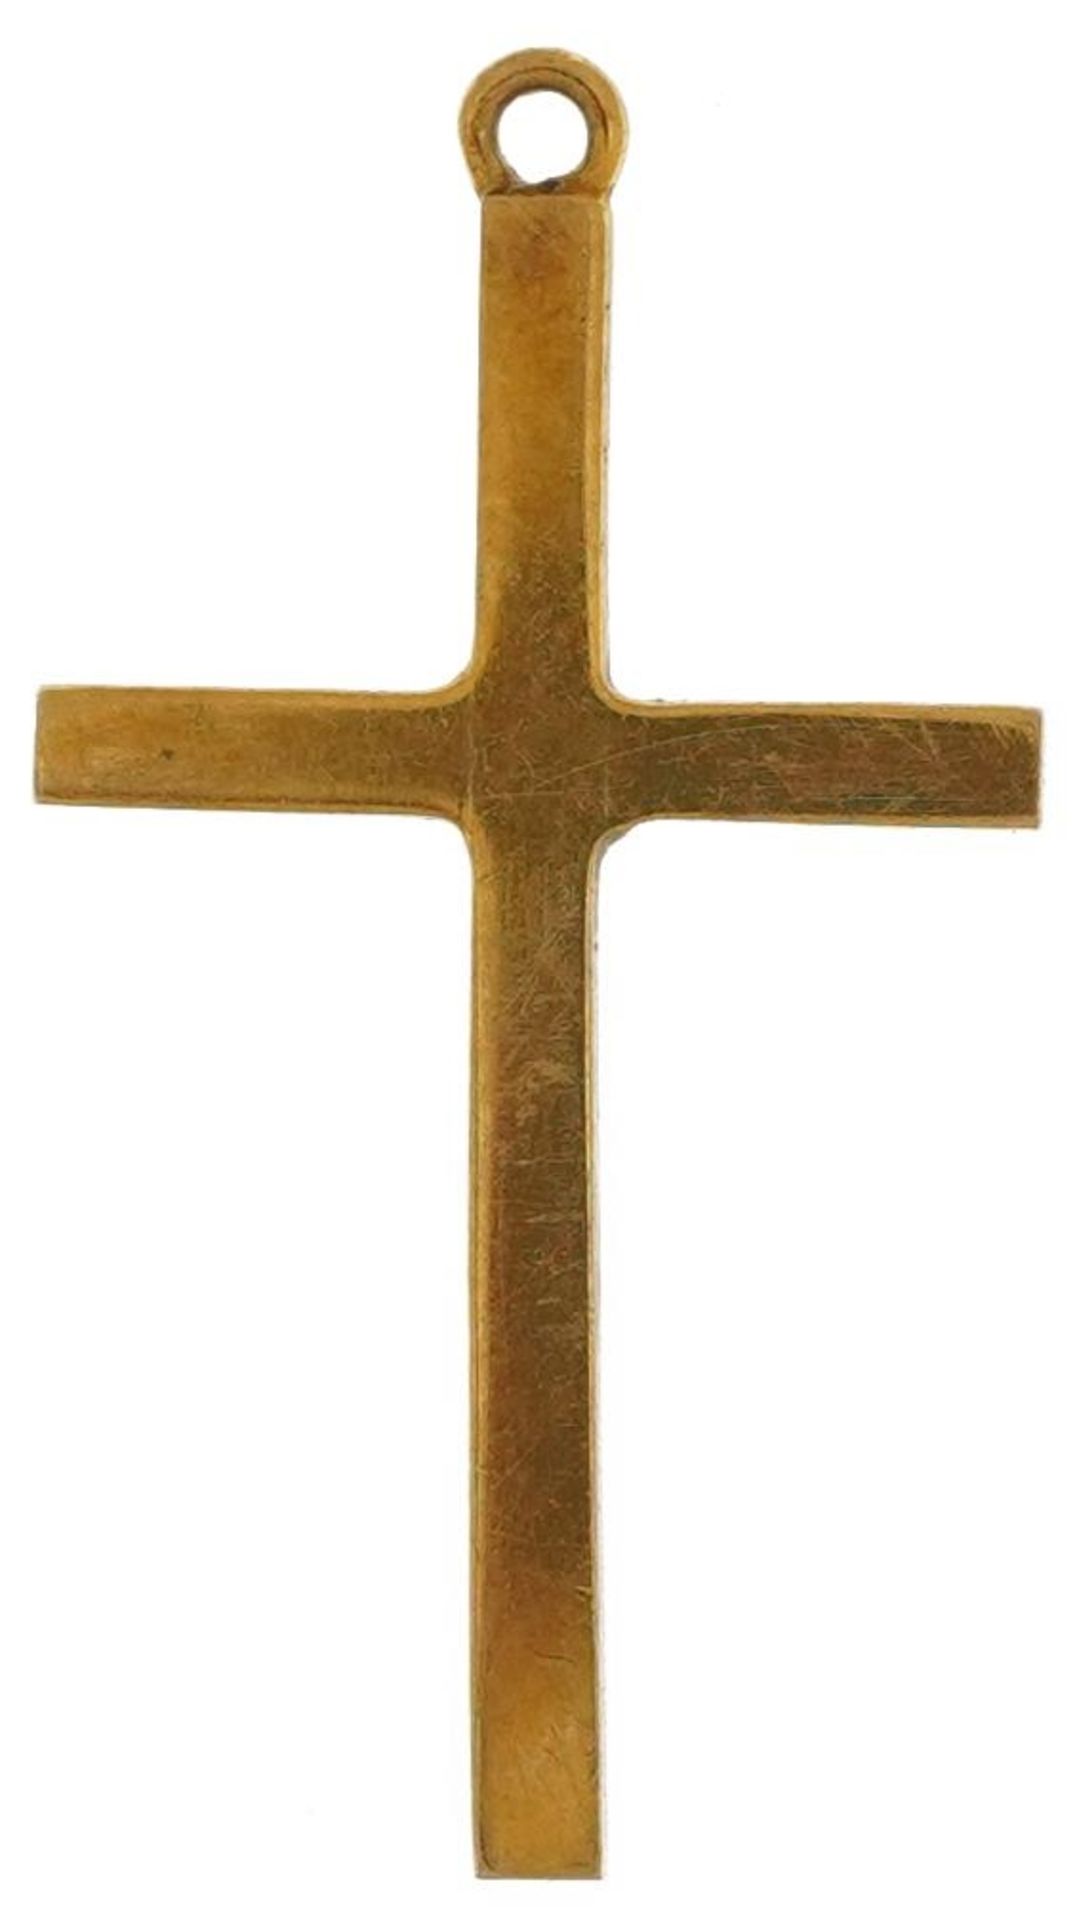 9ct gold engine turned cross pendant, 2.7cm high, 1.3g : For further information on this lot - Image 2 of 3